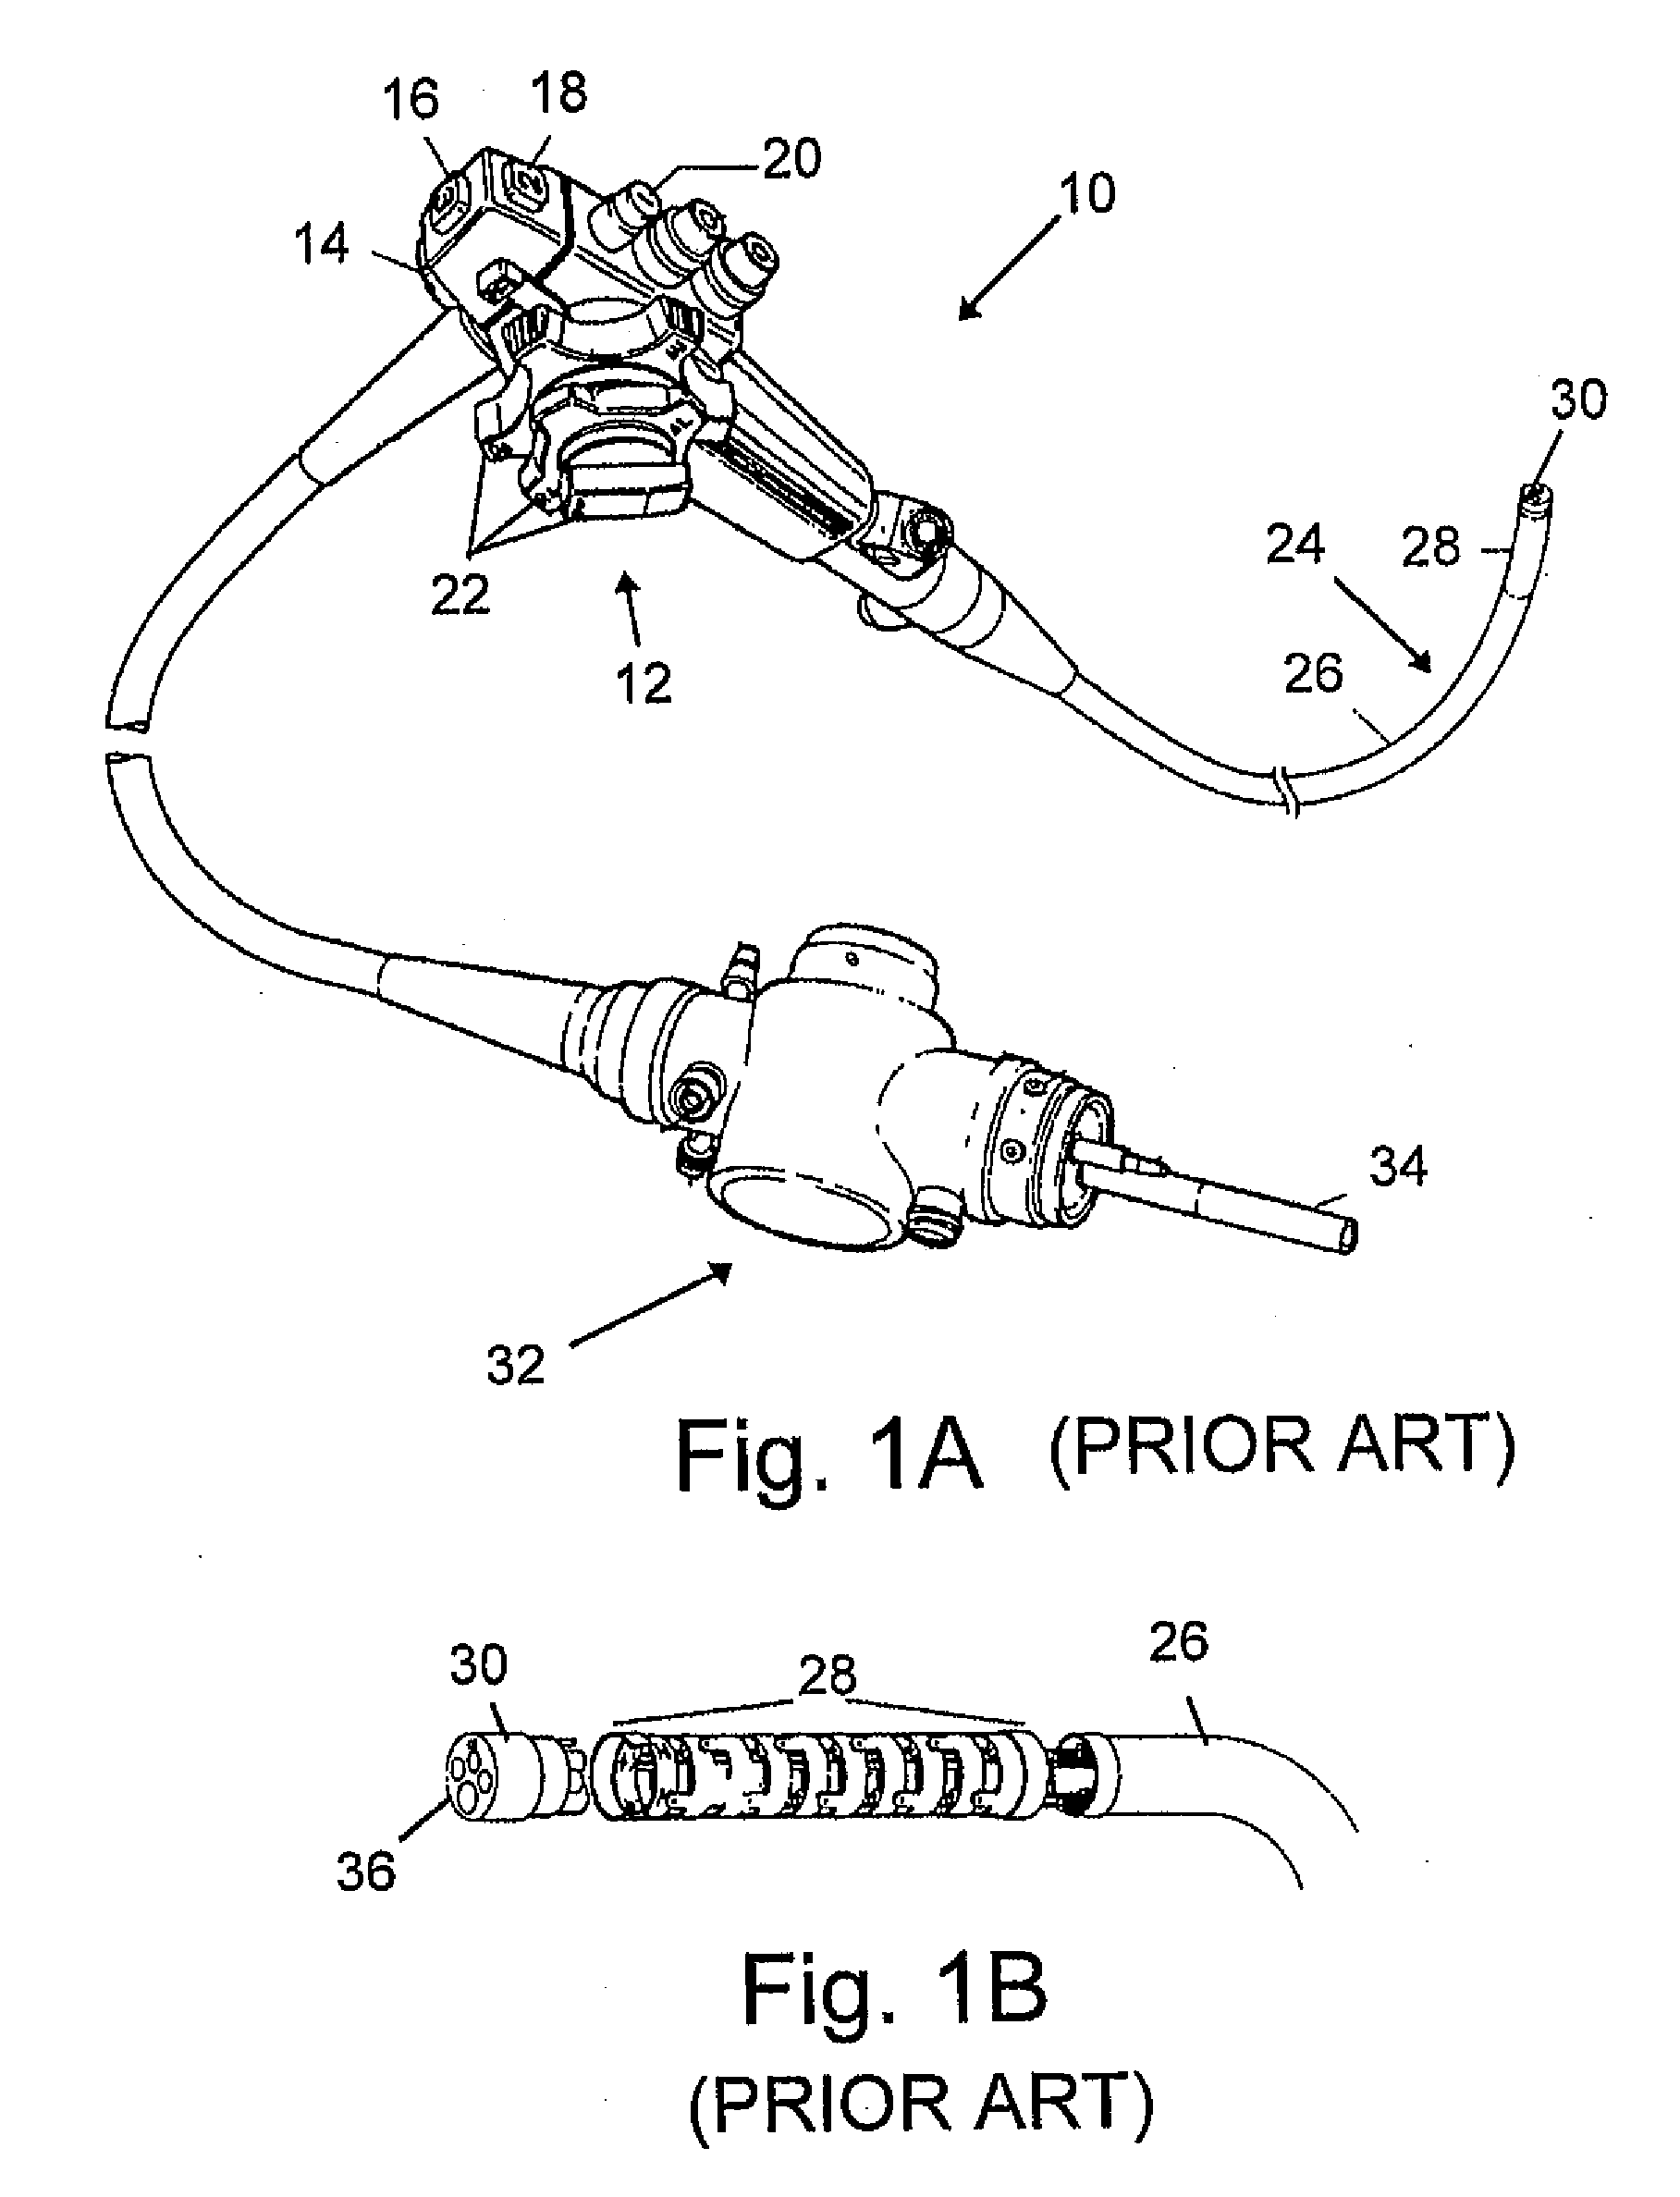 Devices and Methods for Treating Morbid Obesity